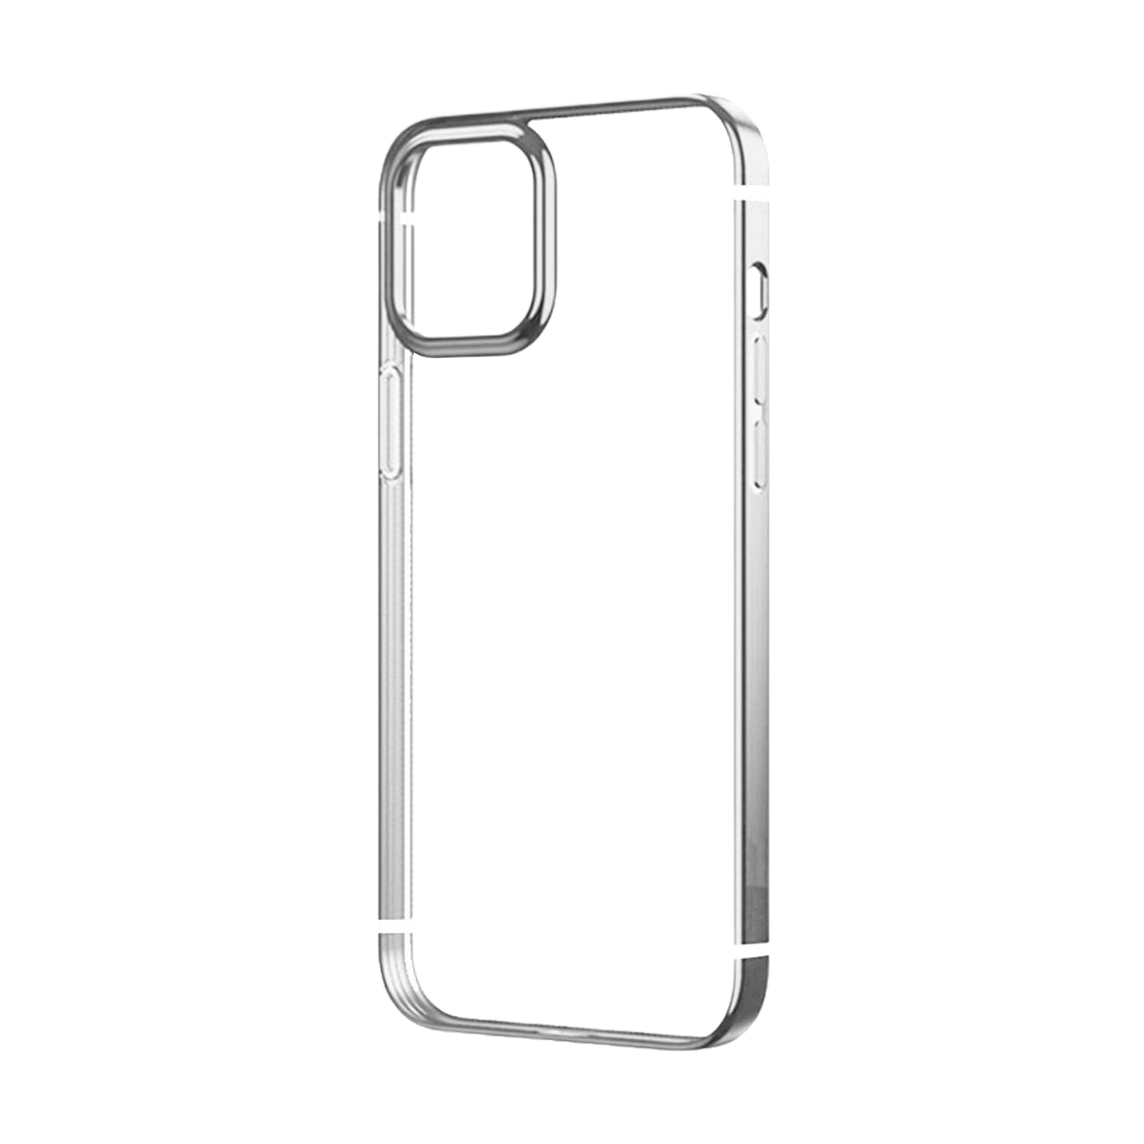 Mutural Case for iPhone 12 Pro